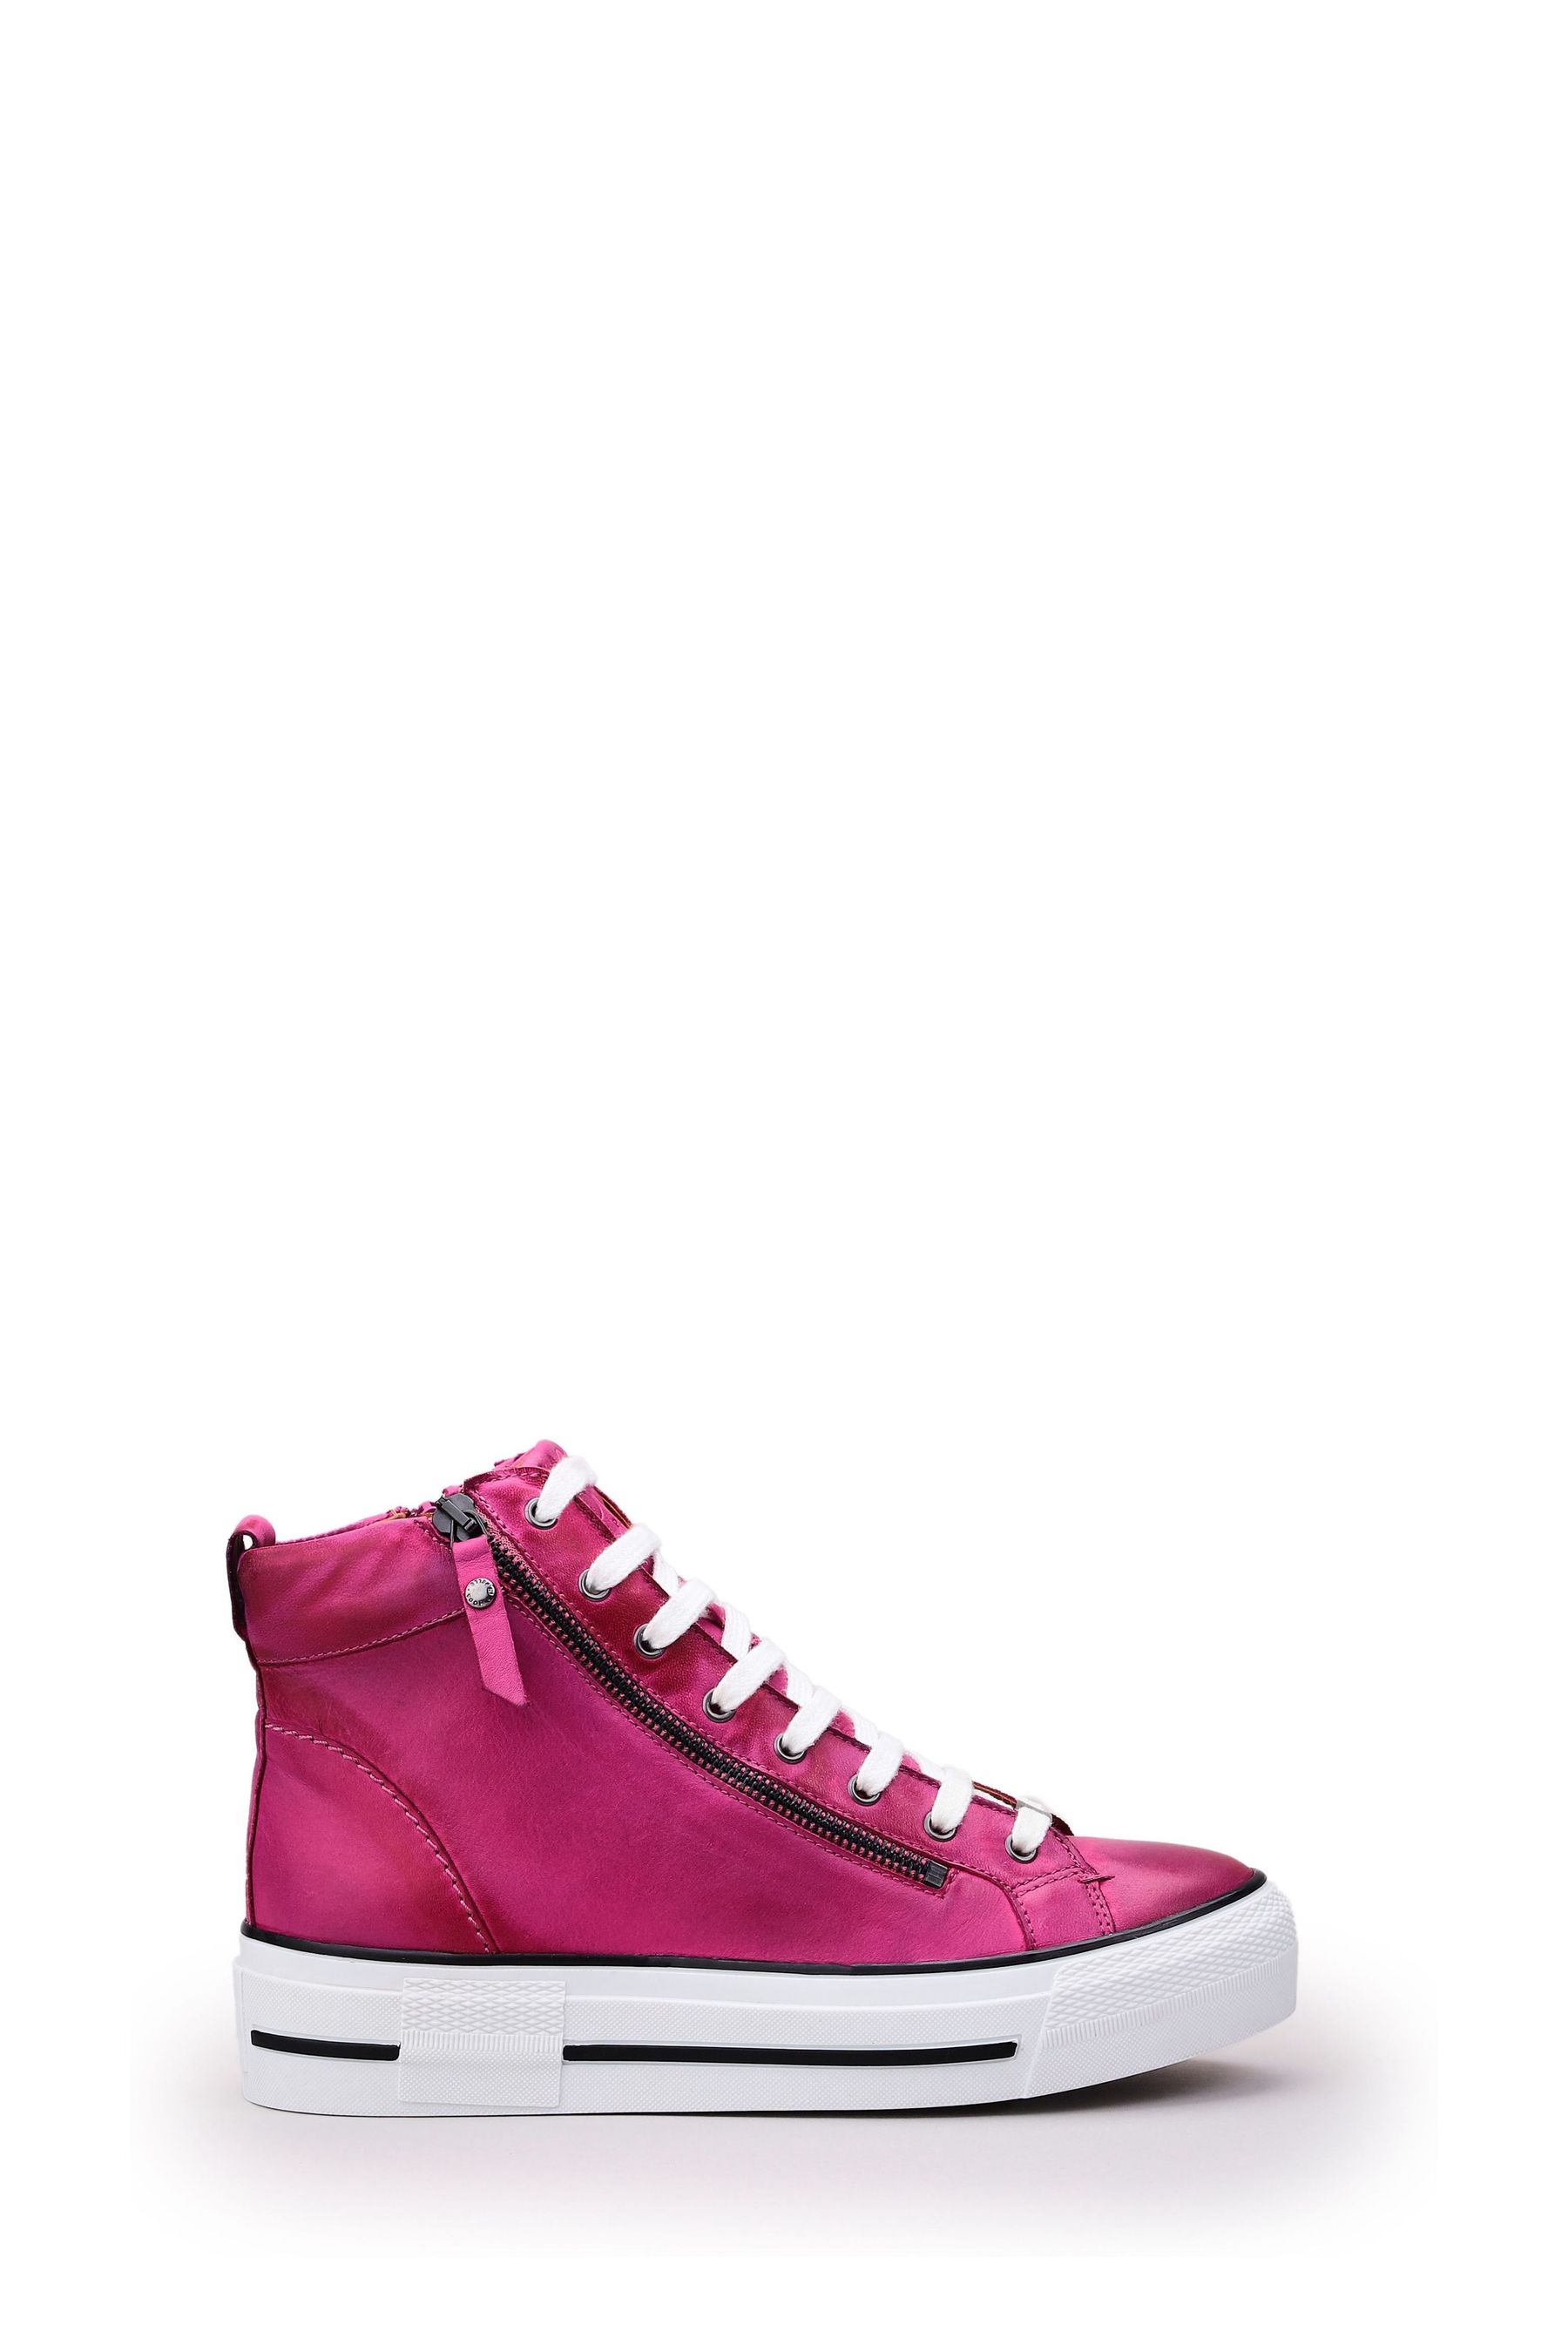 Buy Moda in Pelle Pink Annaken High Top Chunky Sole Lace-Up Trainers ...